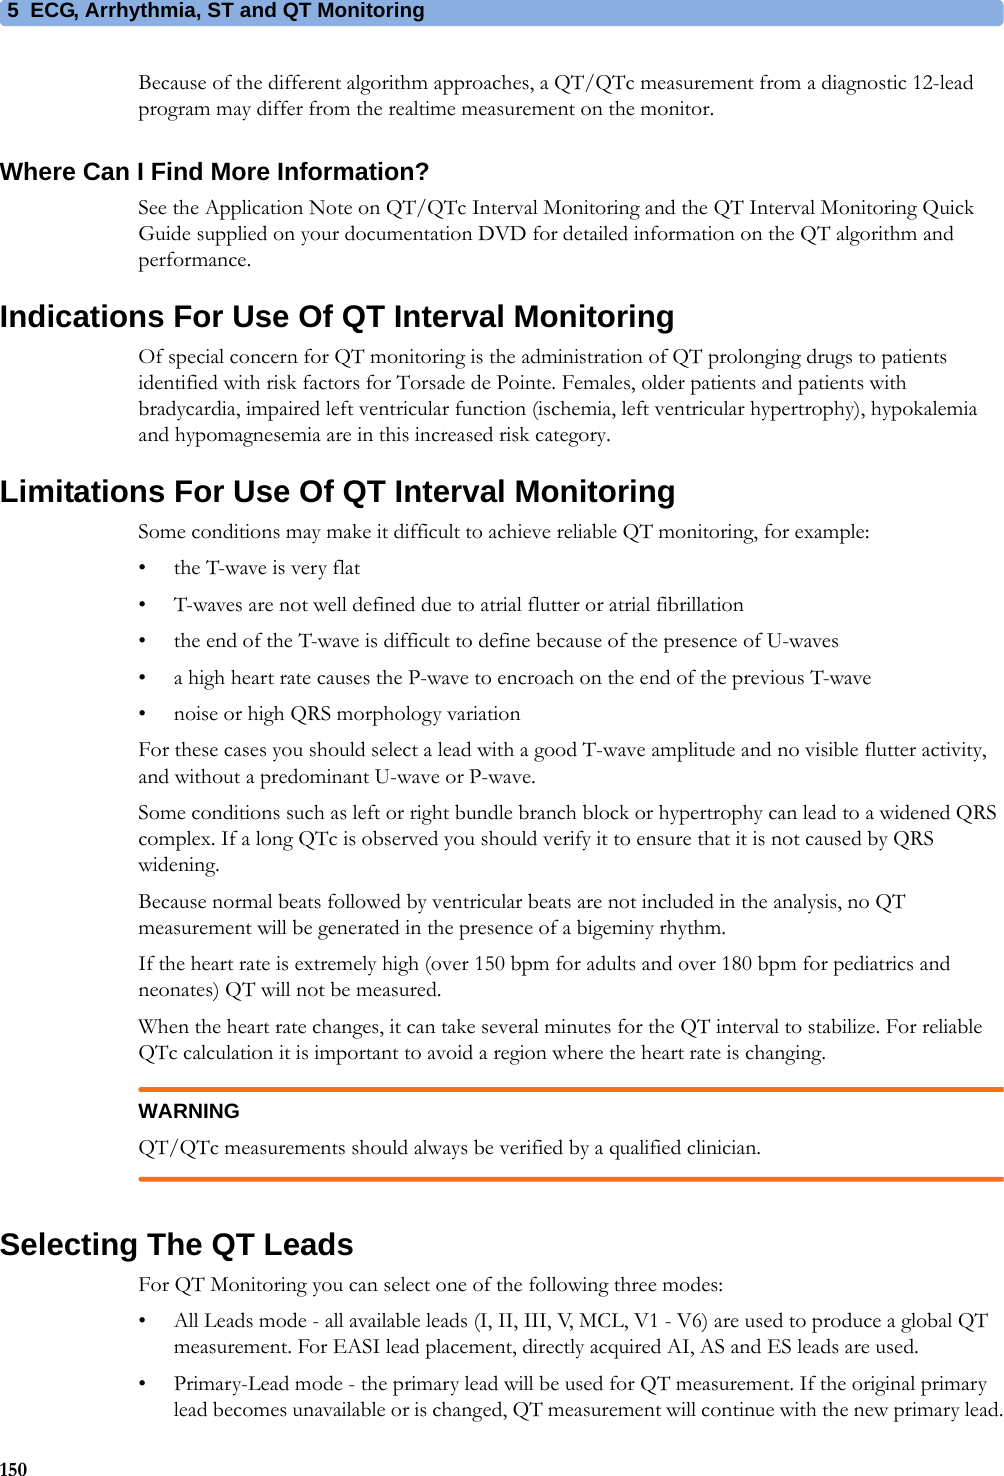 5 ECG, Arrhythmia, ST and QT Monitoring150Because of the different algorithm approaches, a QT/QTc measurement from a diagnostic 12-lead program may differ from the realtime measurement on the monitor.Where Can I Find More Information?See the Application Note on QT/QTc Interval Monitoring and the QT Interval Monitoring Quick Guide supplied on your documentation DVD for detailed information on the QT algorithm and performance.Indications For Use Of QT Interval MonitoringOf special concern for QT monitoring is the administration of QT prolonging drugs to patients identified with risk factors for Torsade de Pointe. Females, older patients and patients with bradycardia, impaired left ventricular function (ischemia, left ventricular hypertrophy), hypokalemia and hypomagnesemia are in this increased risk category.Limitations For Use Of QT Interval MonitoringSome conditions may make it difficult to achieve reliable QT monitoring, for example:• the T-wave is very flat• T-waves are not well defined due to atrial flutter or atrial fibrillation• the end of the T-wave is difficult to define because of the presence of U-waves• a high heart rate causes the P-wave to encroach on the end of the previous T-wave• noise or high QRS morphology variationFor these cases you should select a lead with a good T-wave amplitude and no visible flutter activity, and without a predominant U-wave or P-wave.Some conditions such as left or right bundle branch block or hypertrophy can lead to a widened QRS complex. If a long QTc is observed you should verify it to ensure that it is not caused by QRS widening.Because normal beats followed by ventricular beats are not included in the analysis, no QT measurement will be generated in the presence of a bigeminy rhythm.If the heart rate is extremely high (over 150 bpm for adults and over 180 bpm for pediatrics and neonates) QT will not be measured.When the heart rate changes, it can take several minutes for the QT interval to stabilize. For reliable QTc calculation it is important to avoid a region where the heart rate is changing.WARNINGQT/QTc measurements should always be verified by a qualified clinician.Selecting The QT LeadsFor QT Monitoring you can select one of the following three modes:• All Leads mode - all available leads (I, II, III, V, MCL, V1 - V6) are used to produce a global QT measurement. For EASI lead placement, directly acquired AI, AS and ES leads are used.• Primary-Lead mode - the primary lead will be used for QT measurement. If the original primary lead becomes unavailable or is changed, QT measurement will continue with the new primary lead.